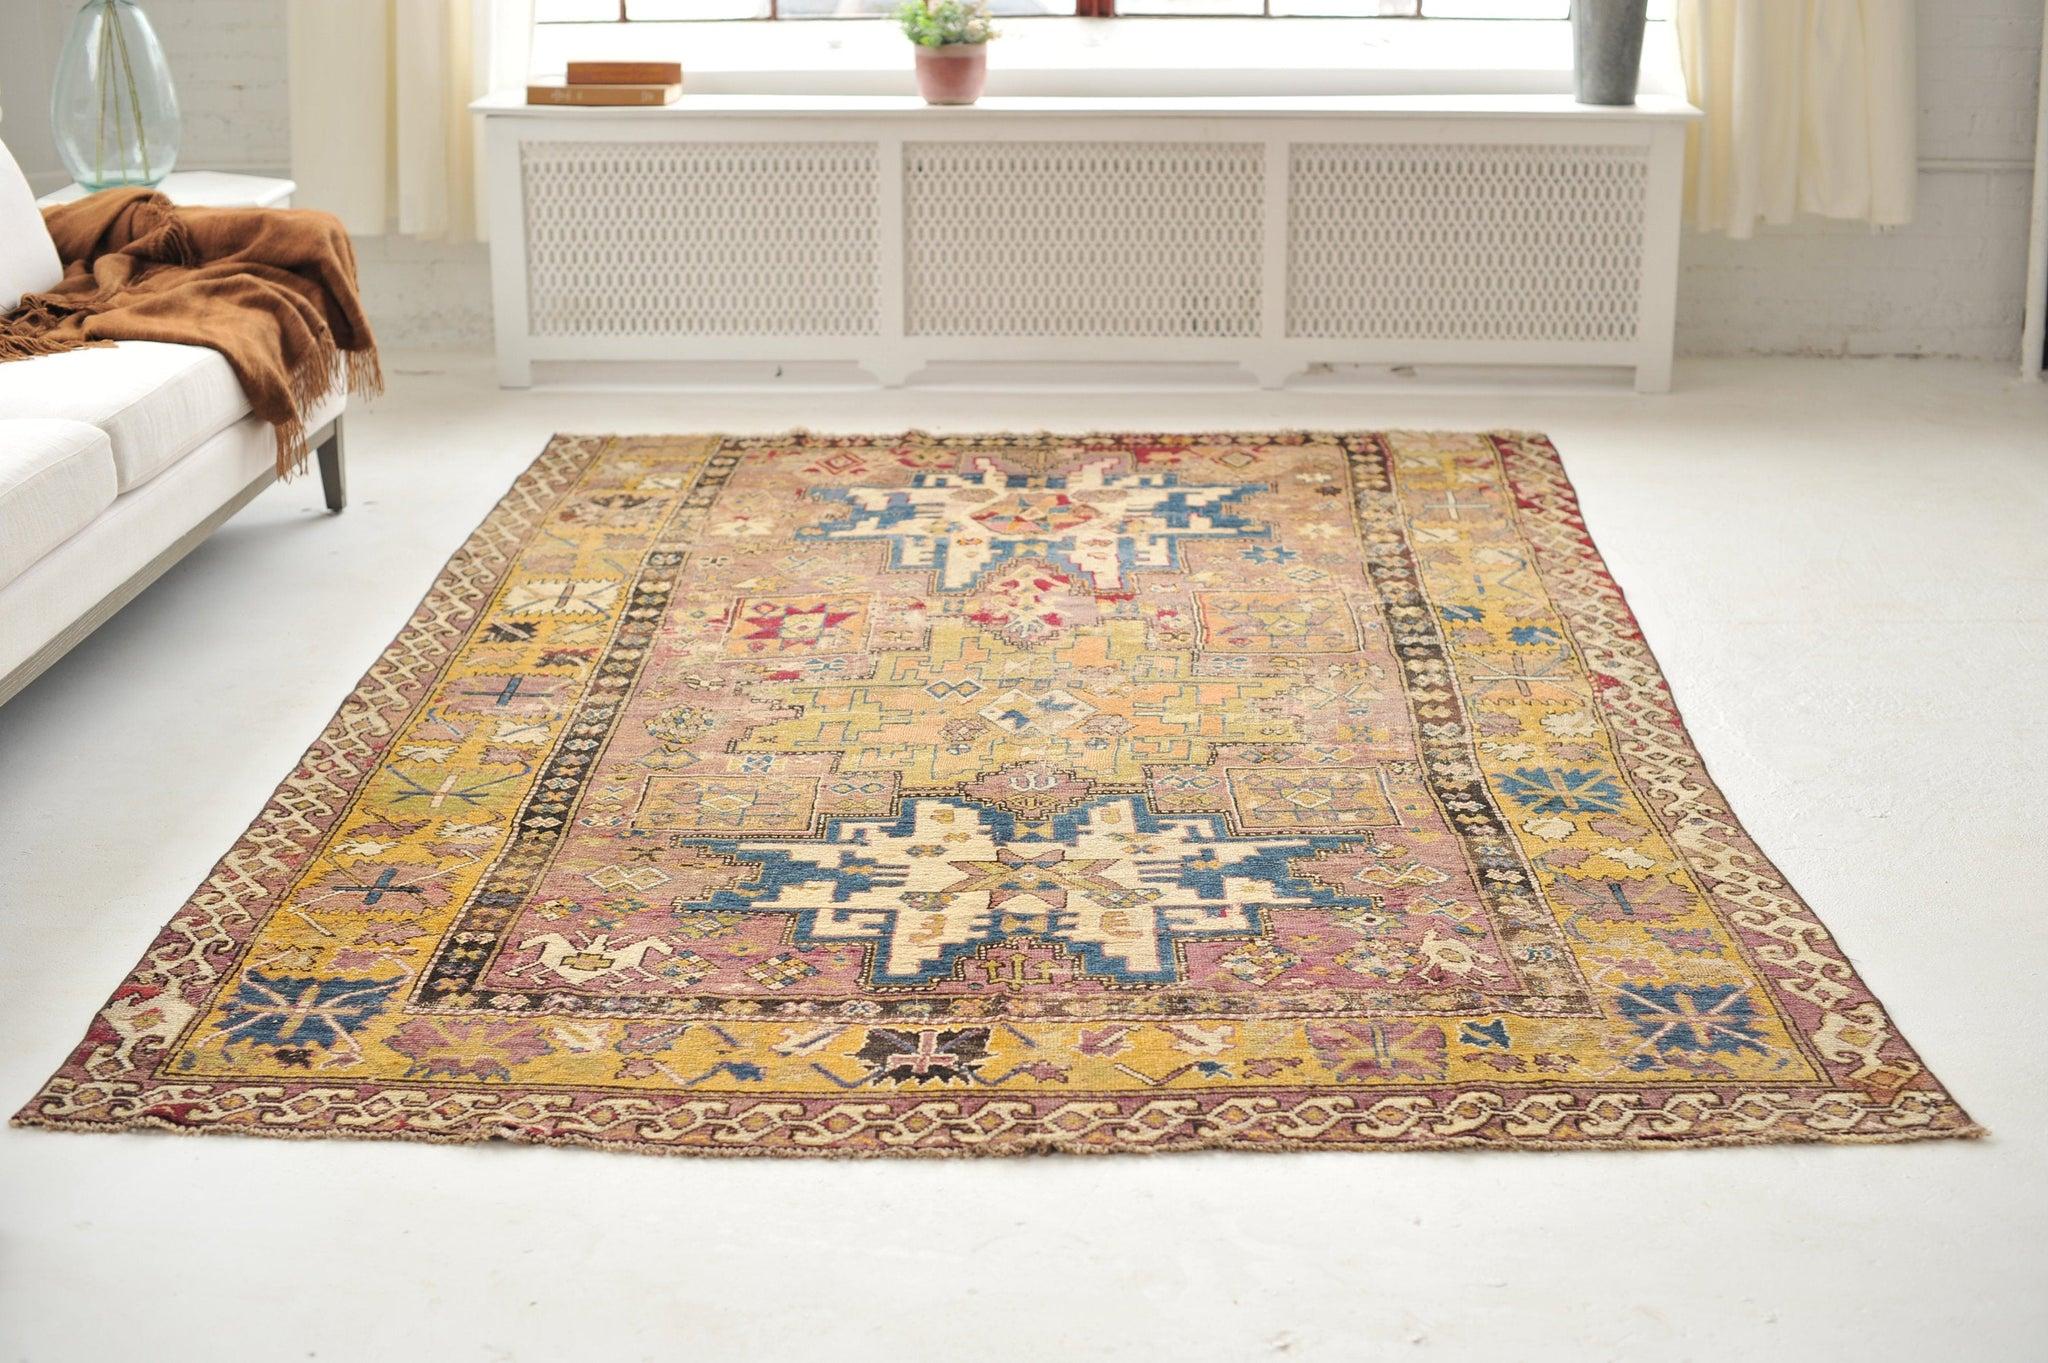 Antique Textile Rug with Lavender, Sunflower Yellows, & Blues, c. 1900 For Sale 13